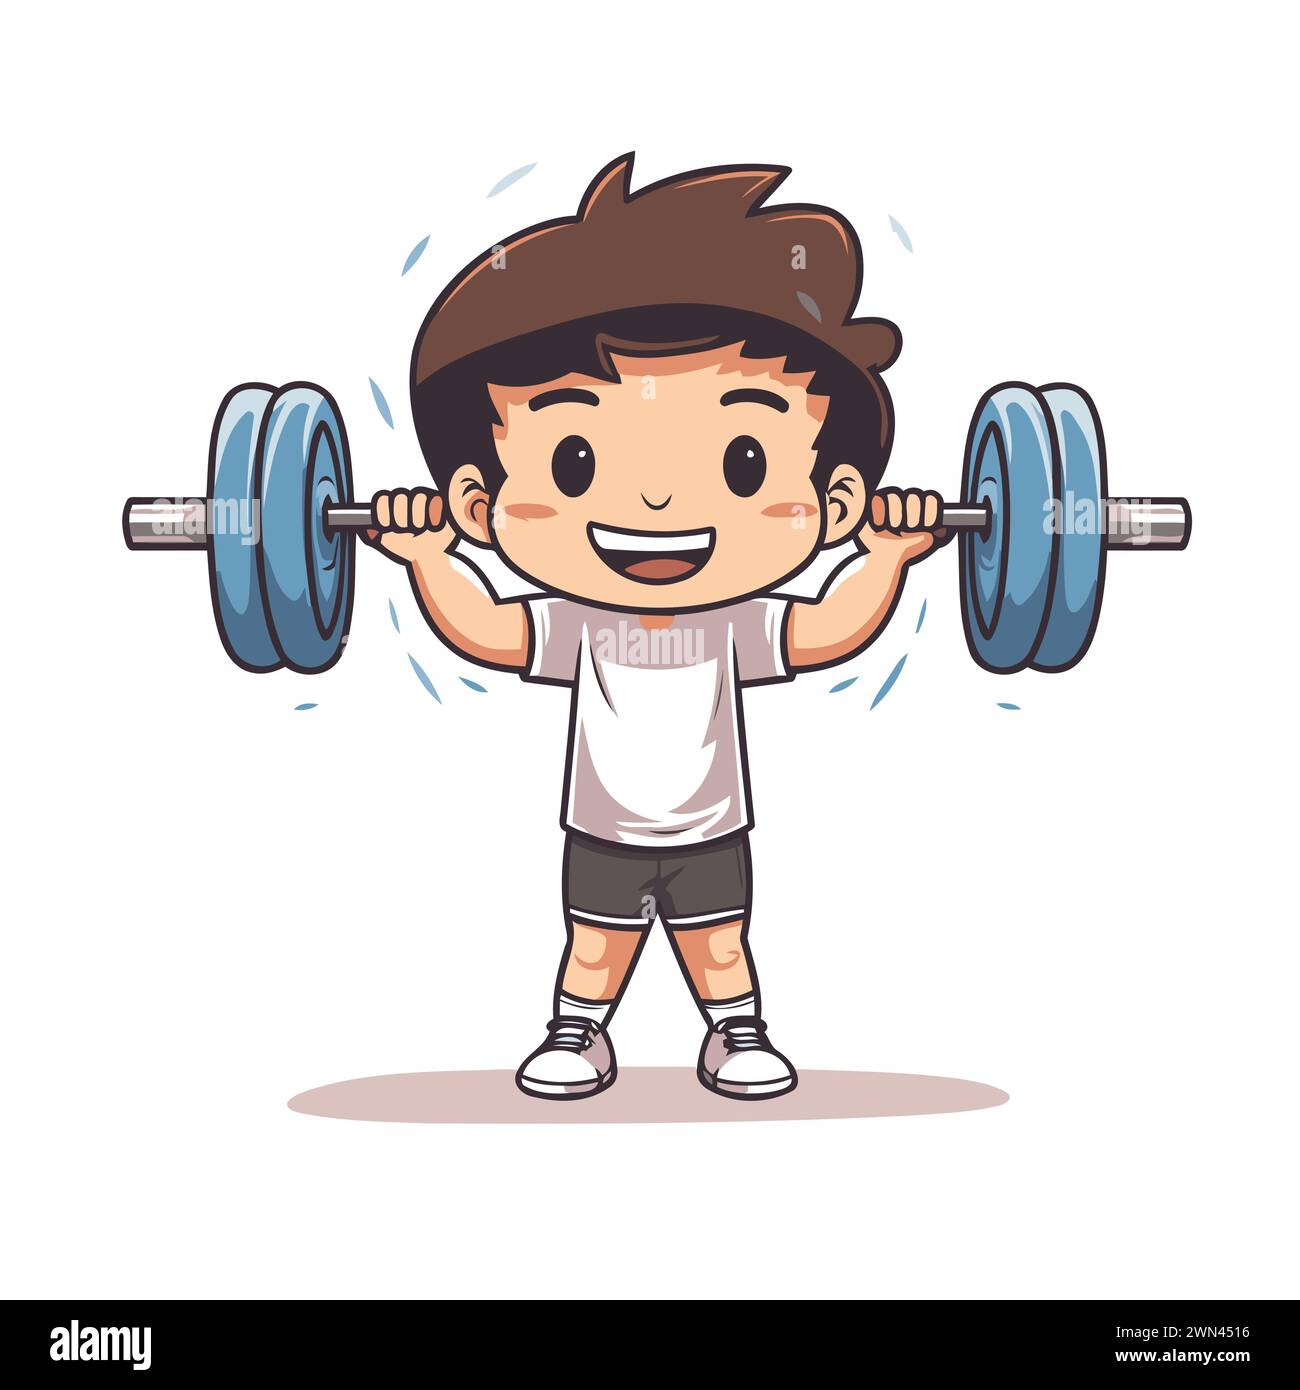 Premium Photo  Gym bunny cute cartoon white rabbit lifting heavy barbell  Funny fitness and exercise vector illust